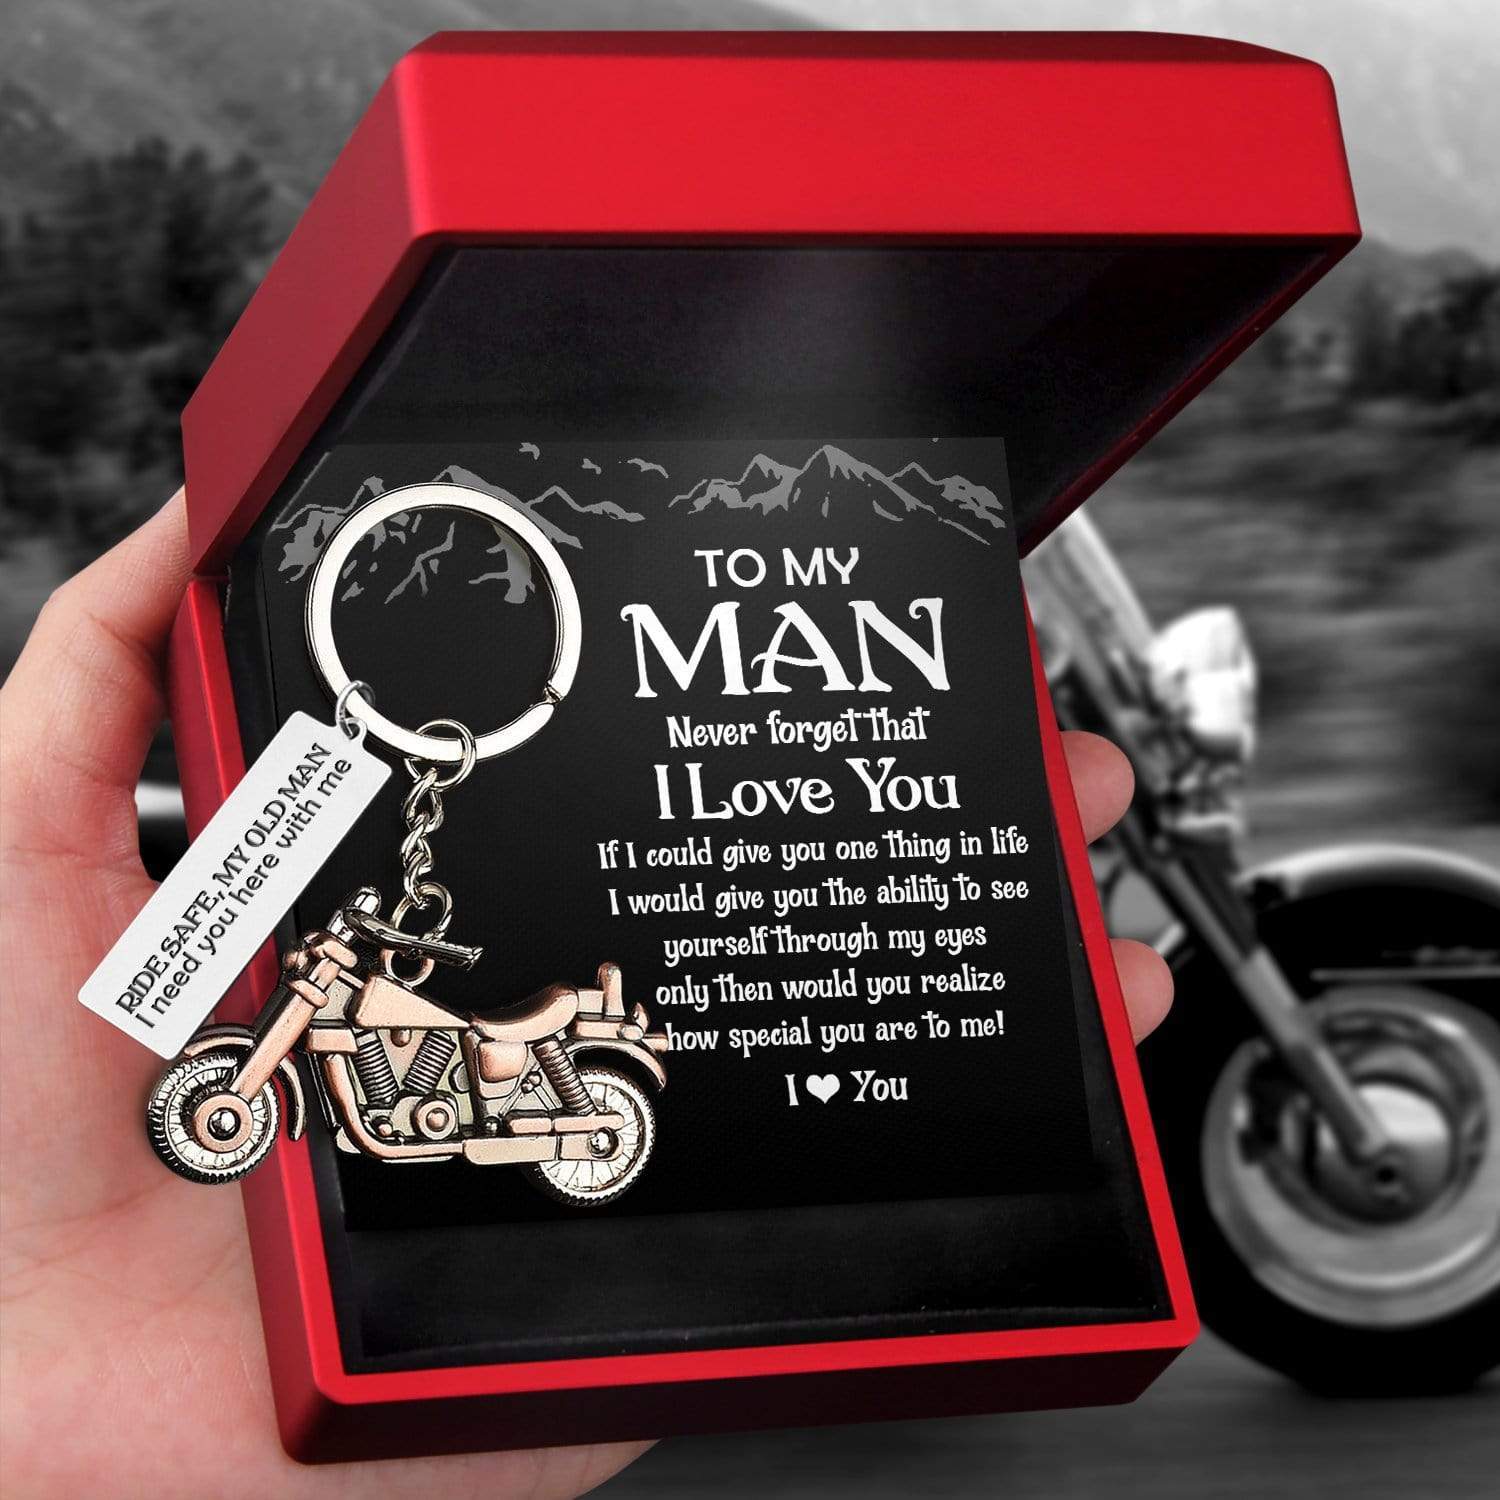 Wrapsify Leather Keychain - Drive Safely Handsome, I Need You Here with Me - Love You More - Gkq26006 Black